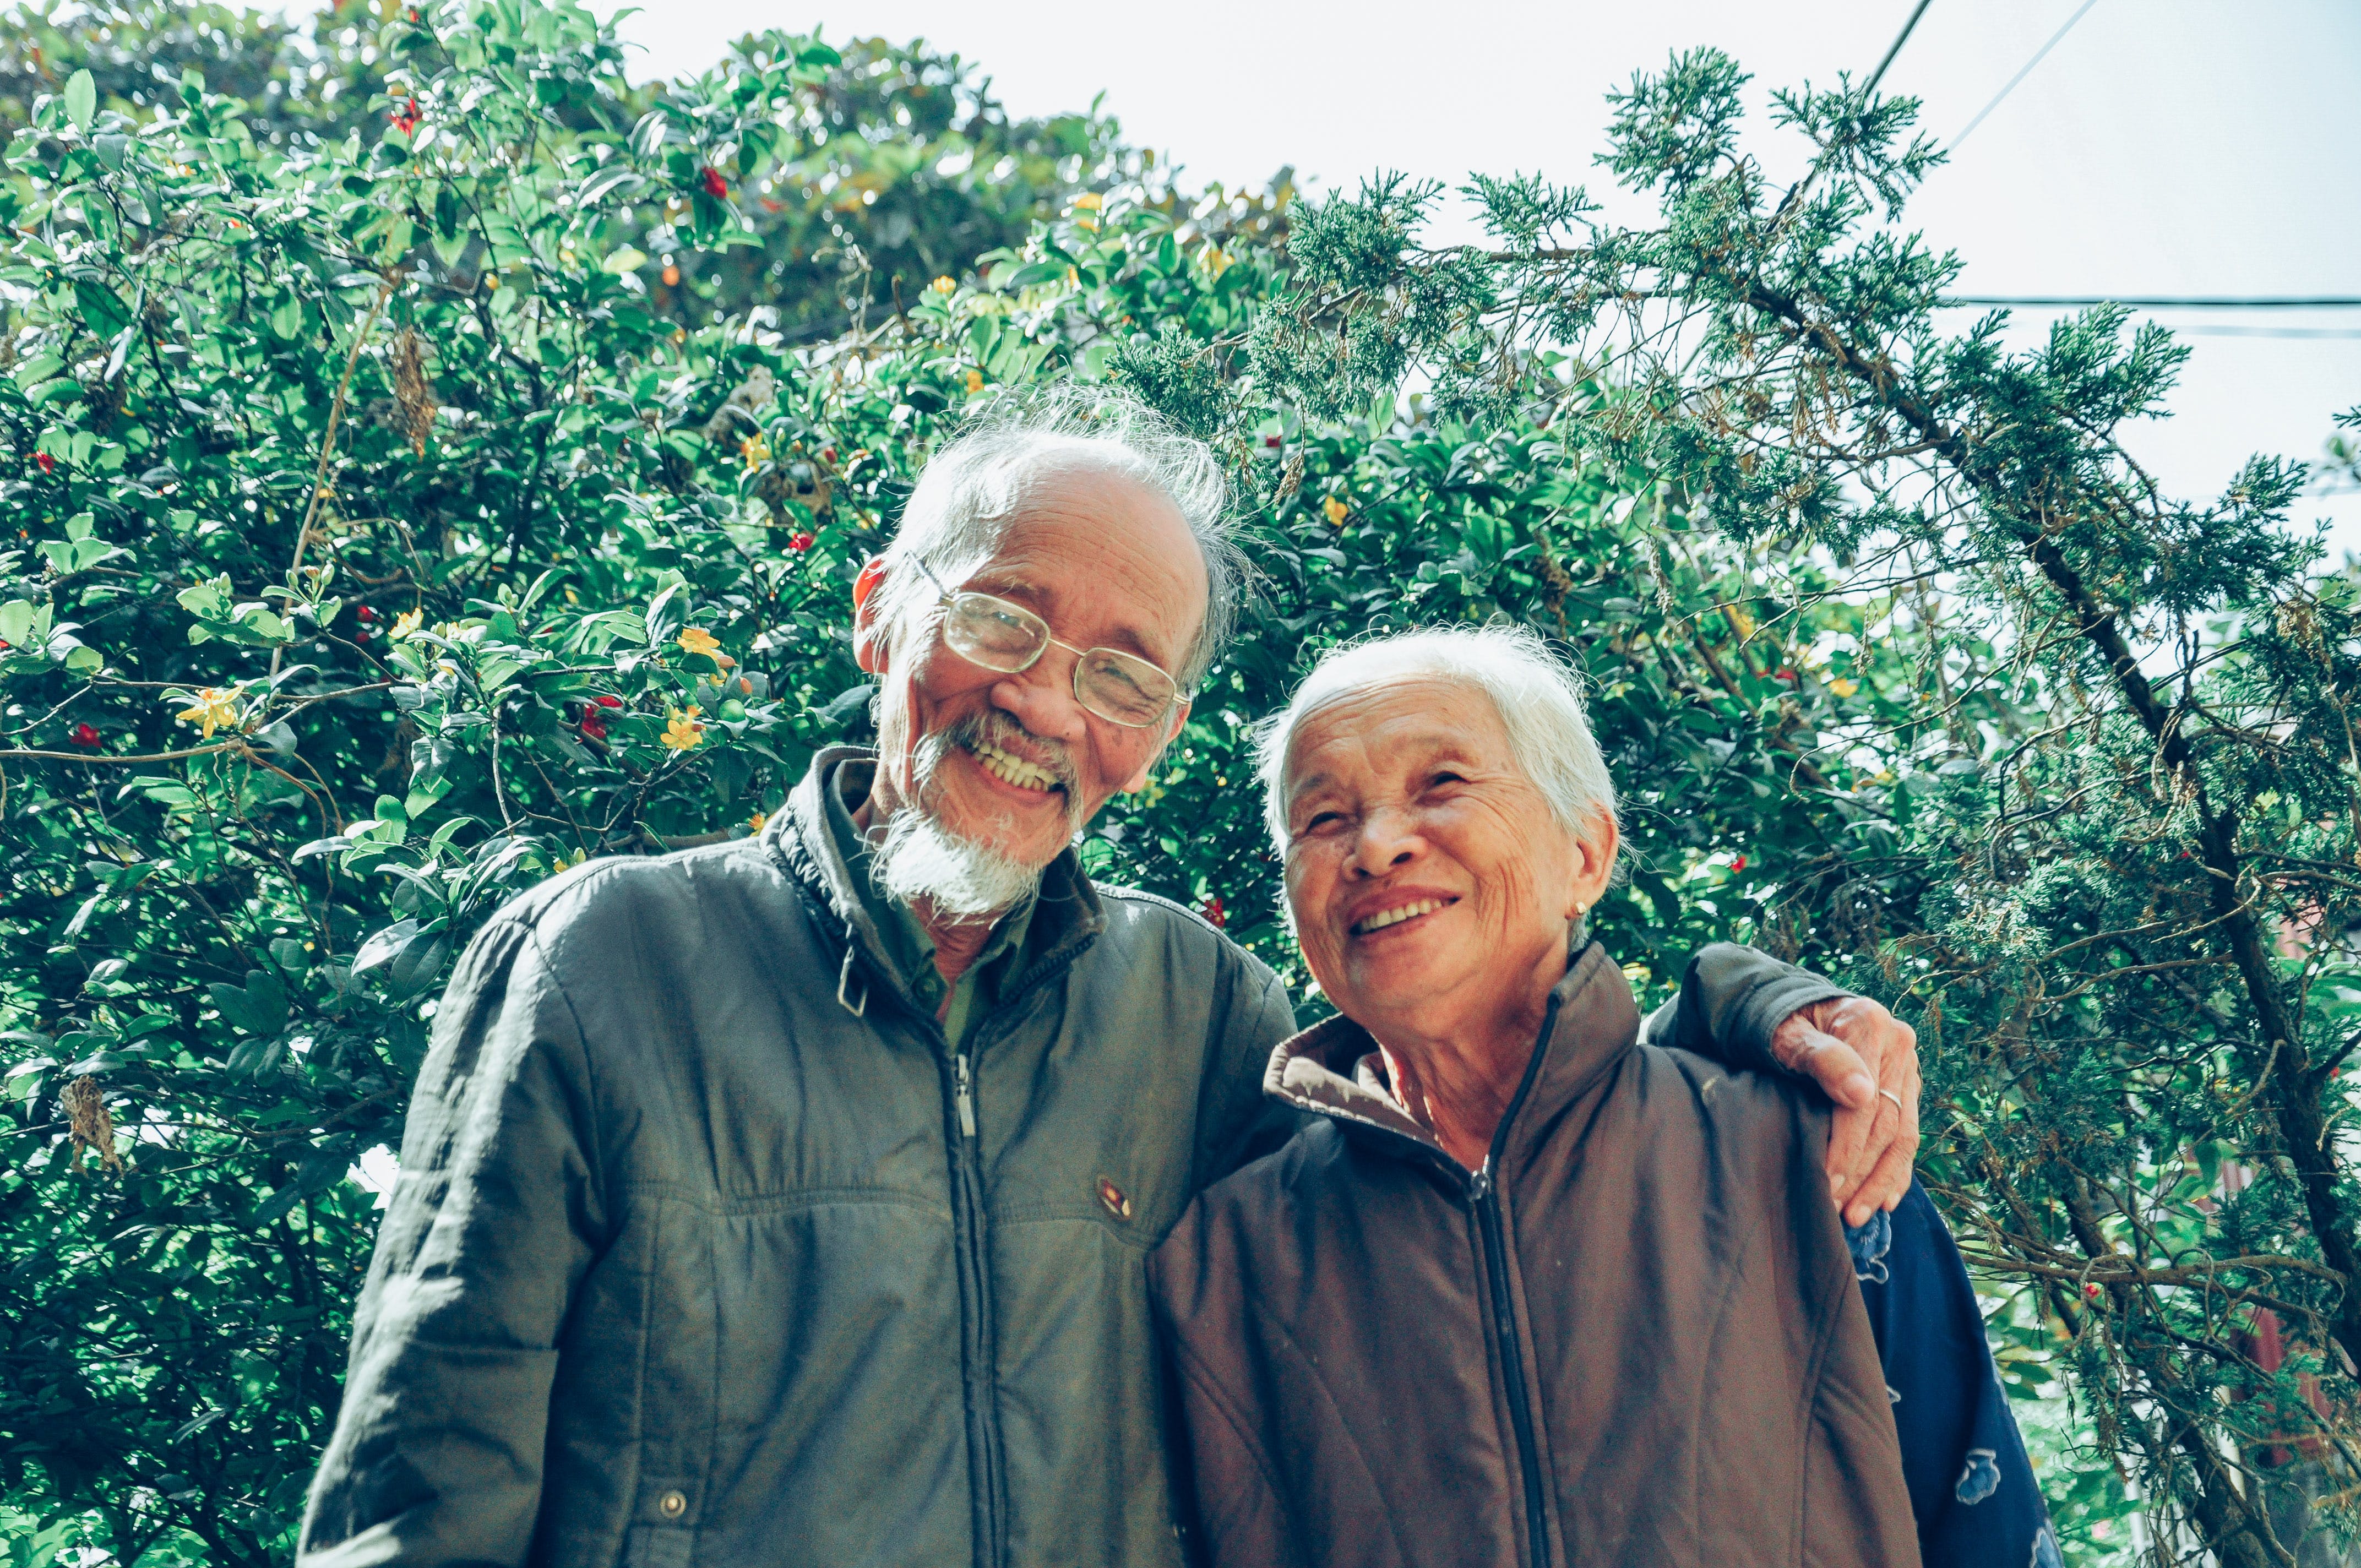 An older couple embracing and smiling while standing outside | Source: Pexels